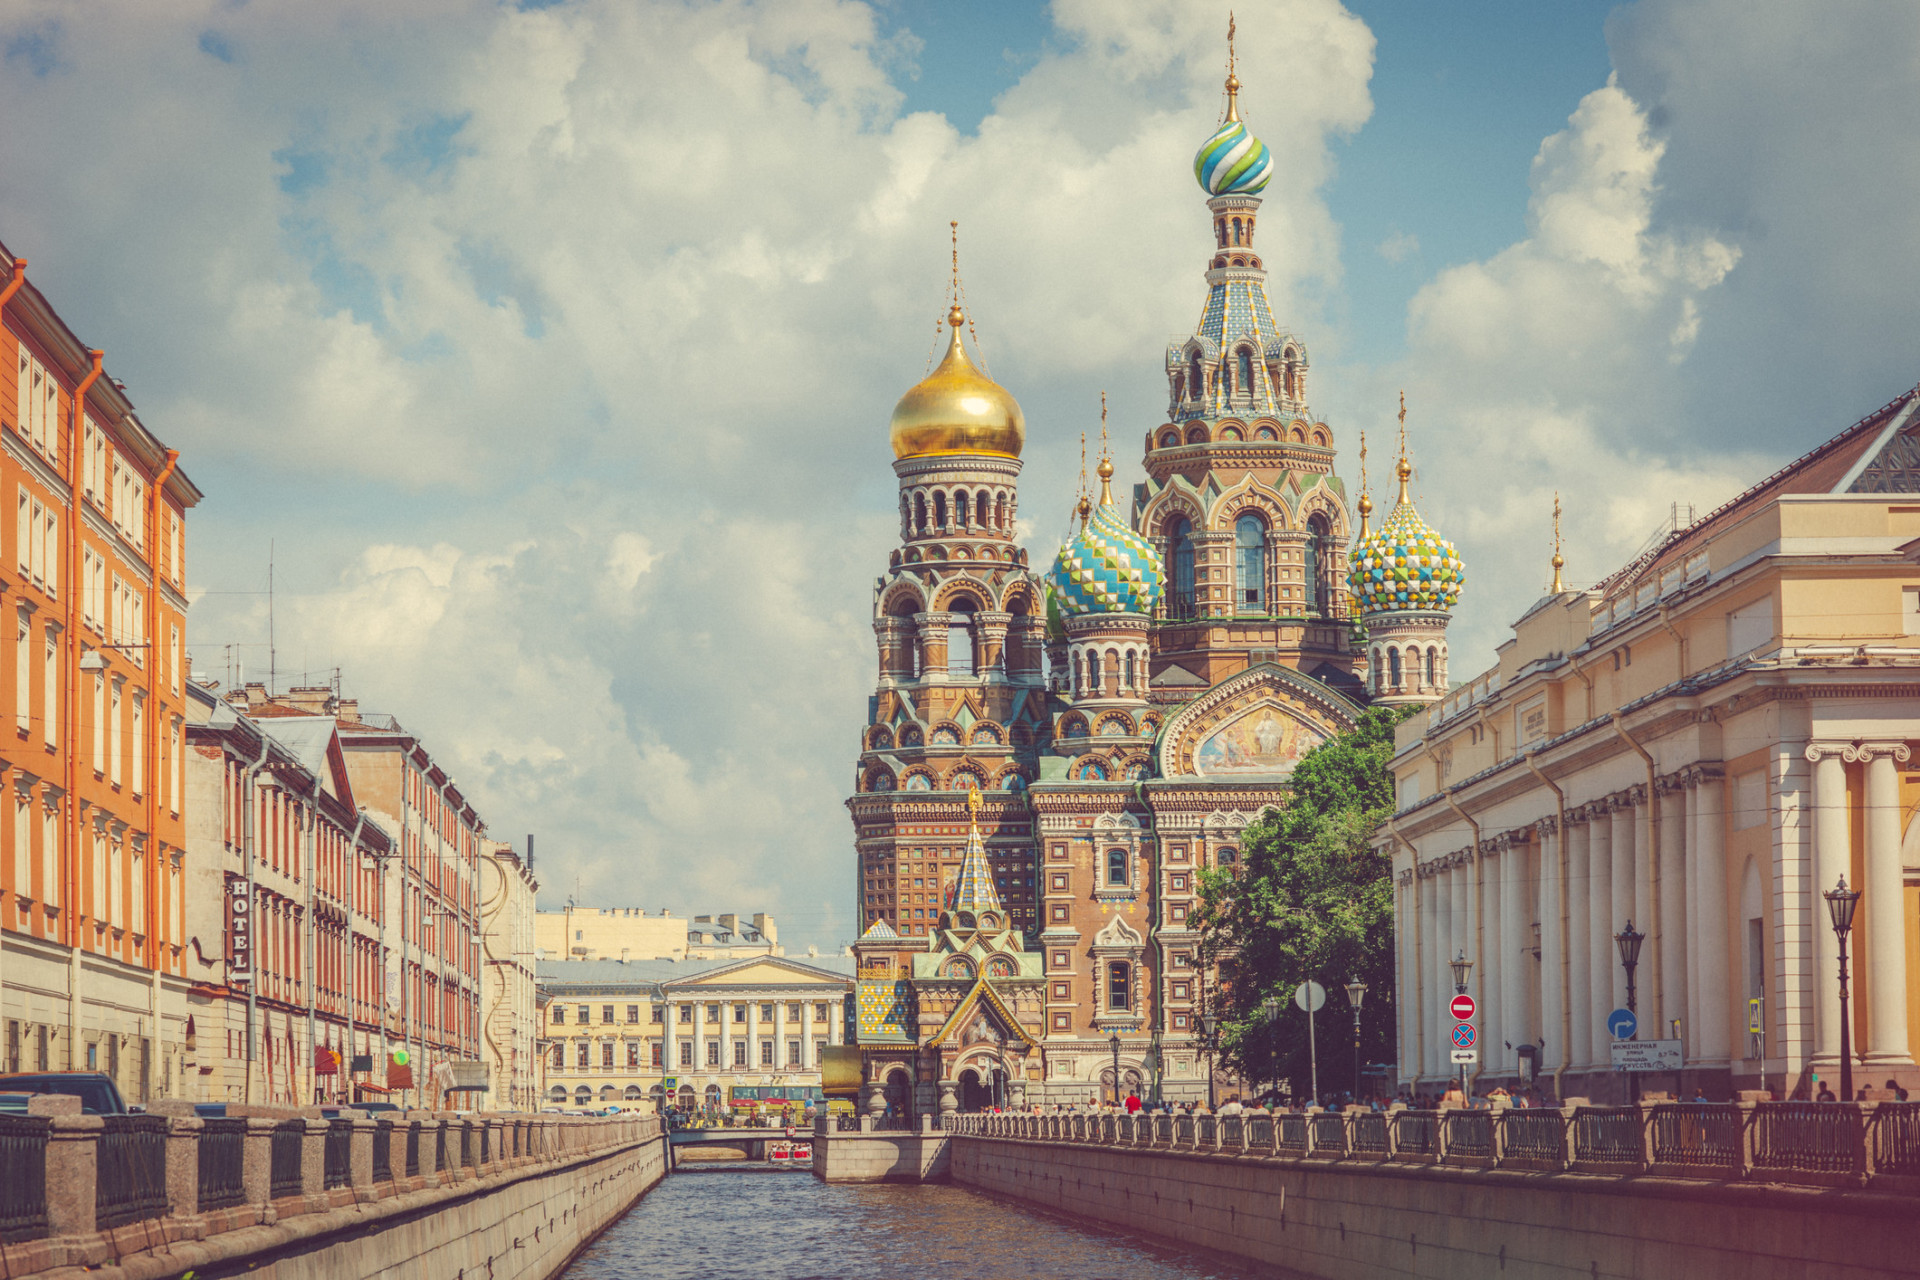 St. Petersburg is also super easy to walk around, and its charm lies within its bridges and canals, as well as the rich architecture.<p><a href="https://www.msn.com/en-us/community/channel/vid-7xx8mnucu55yw63we9va2gwr7uihbxwc68fxqp25x6tg4ftibpra?cvid=94631541bc0f4f89bfd59158d696ad7e">Follow us and access great exclusive content every day</a></p>